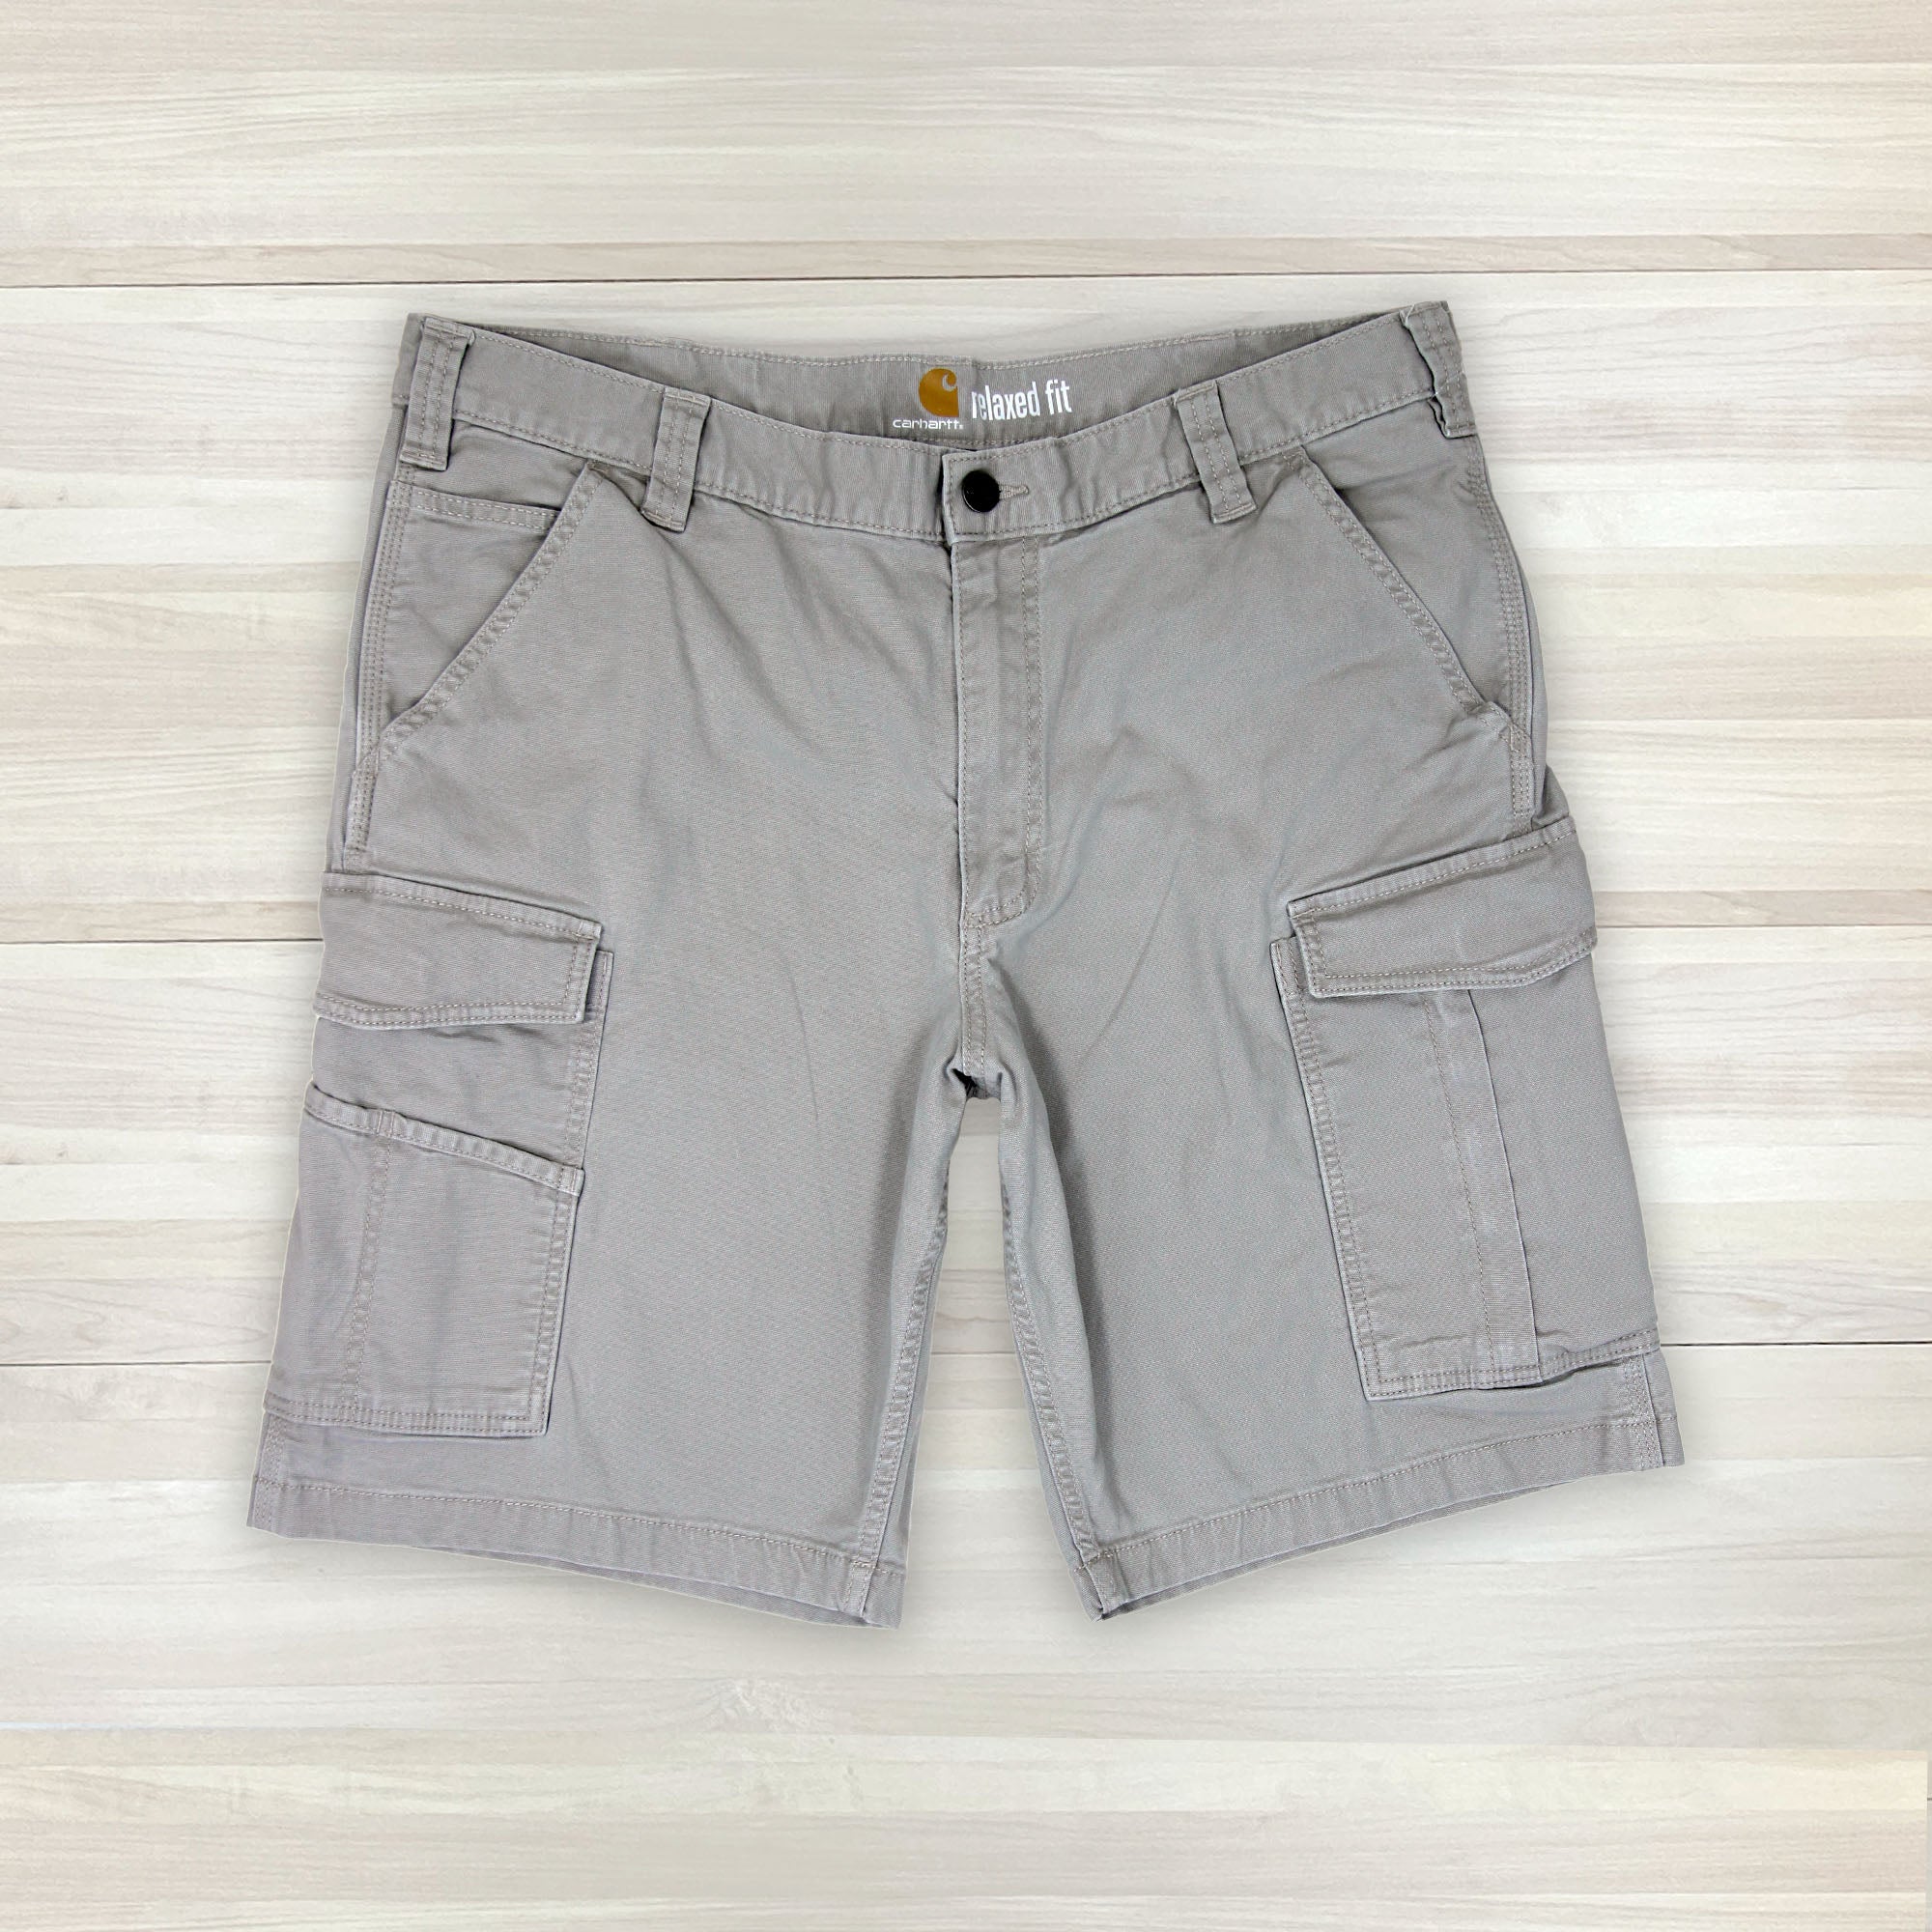 Men's Carhartt Relaxed Fit Canvas Shorts - Size 38